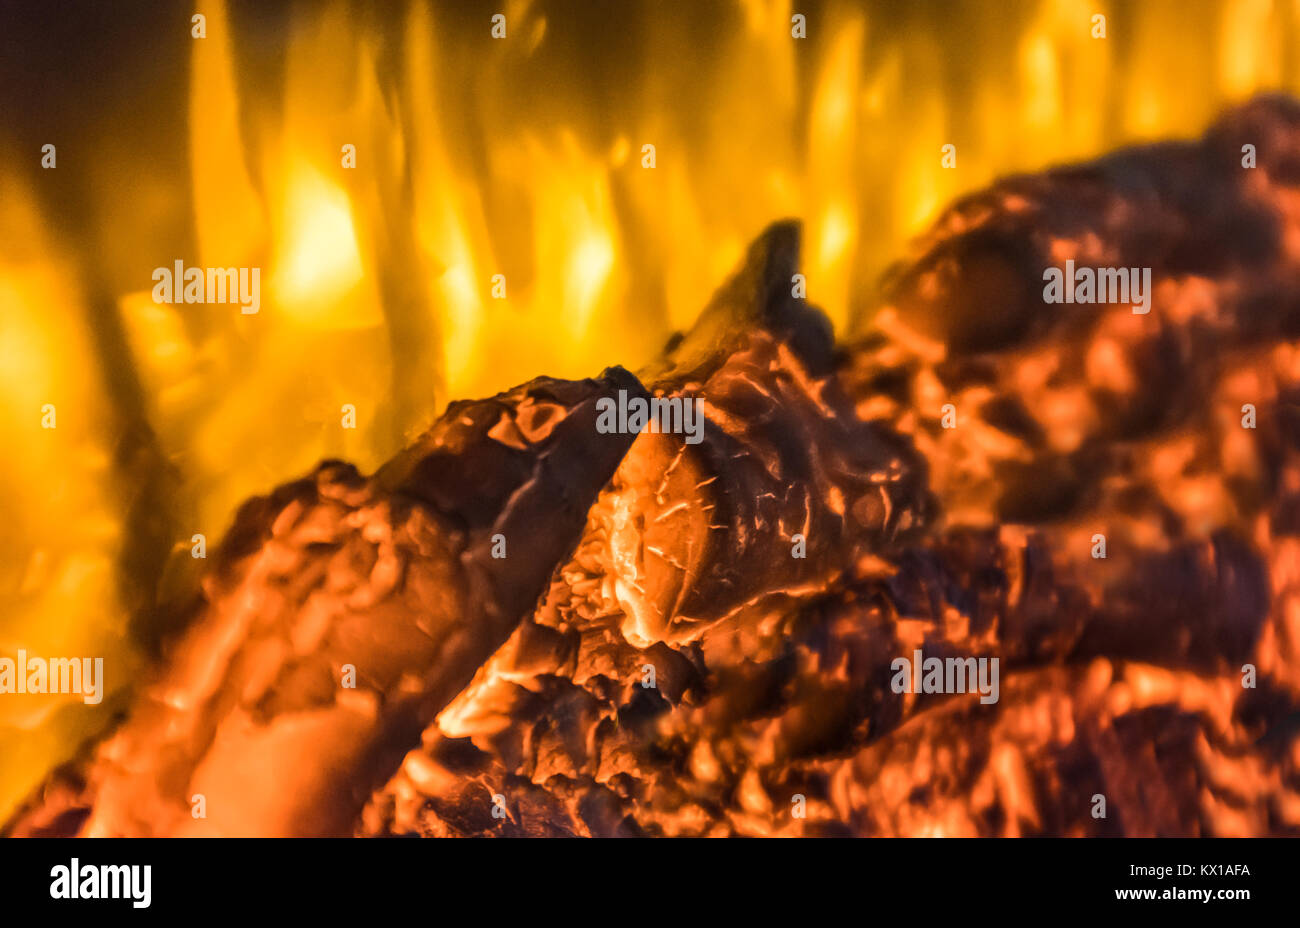 logs glowing and burning with golden flames in a glass fronted imitation electric wall log fire, fireplace. Background image for fire and warmth Stock Photo